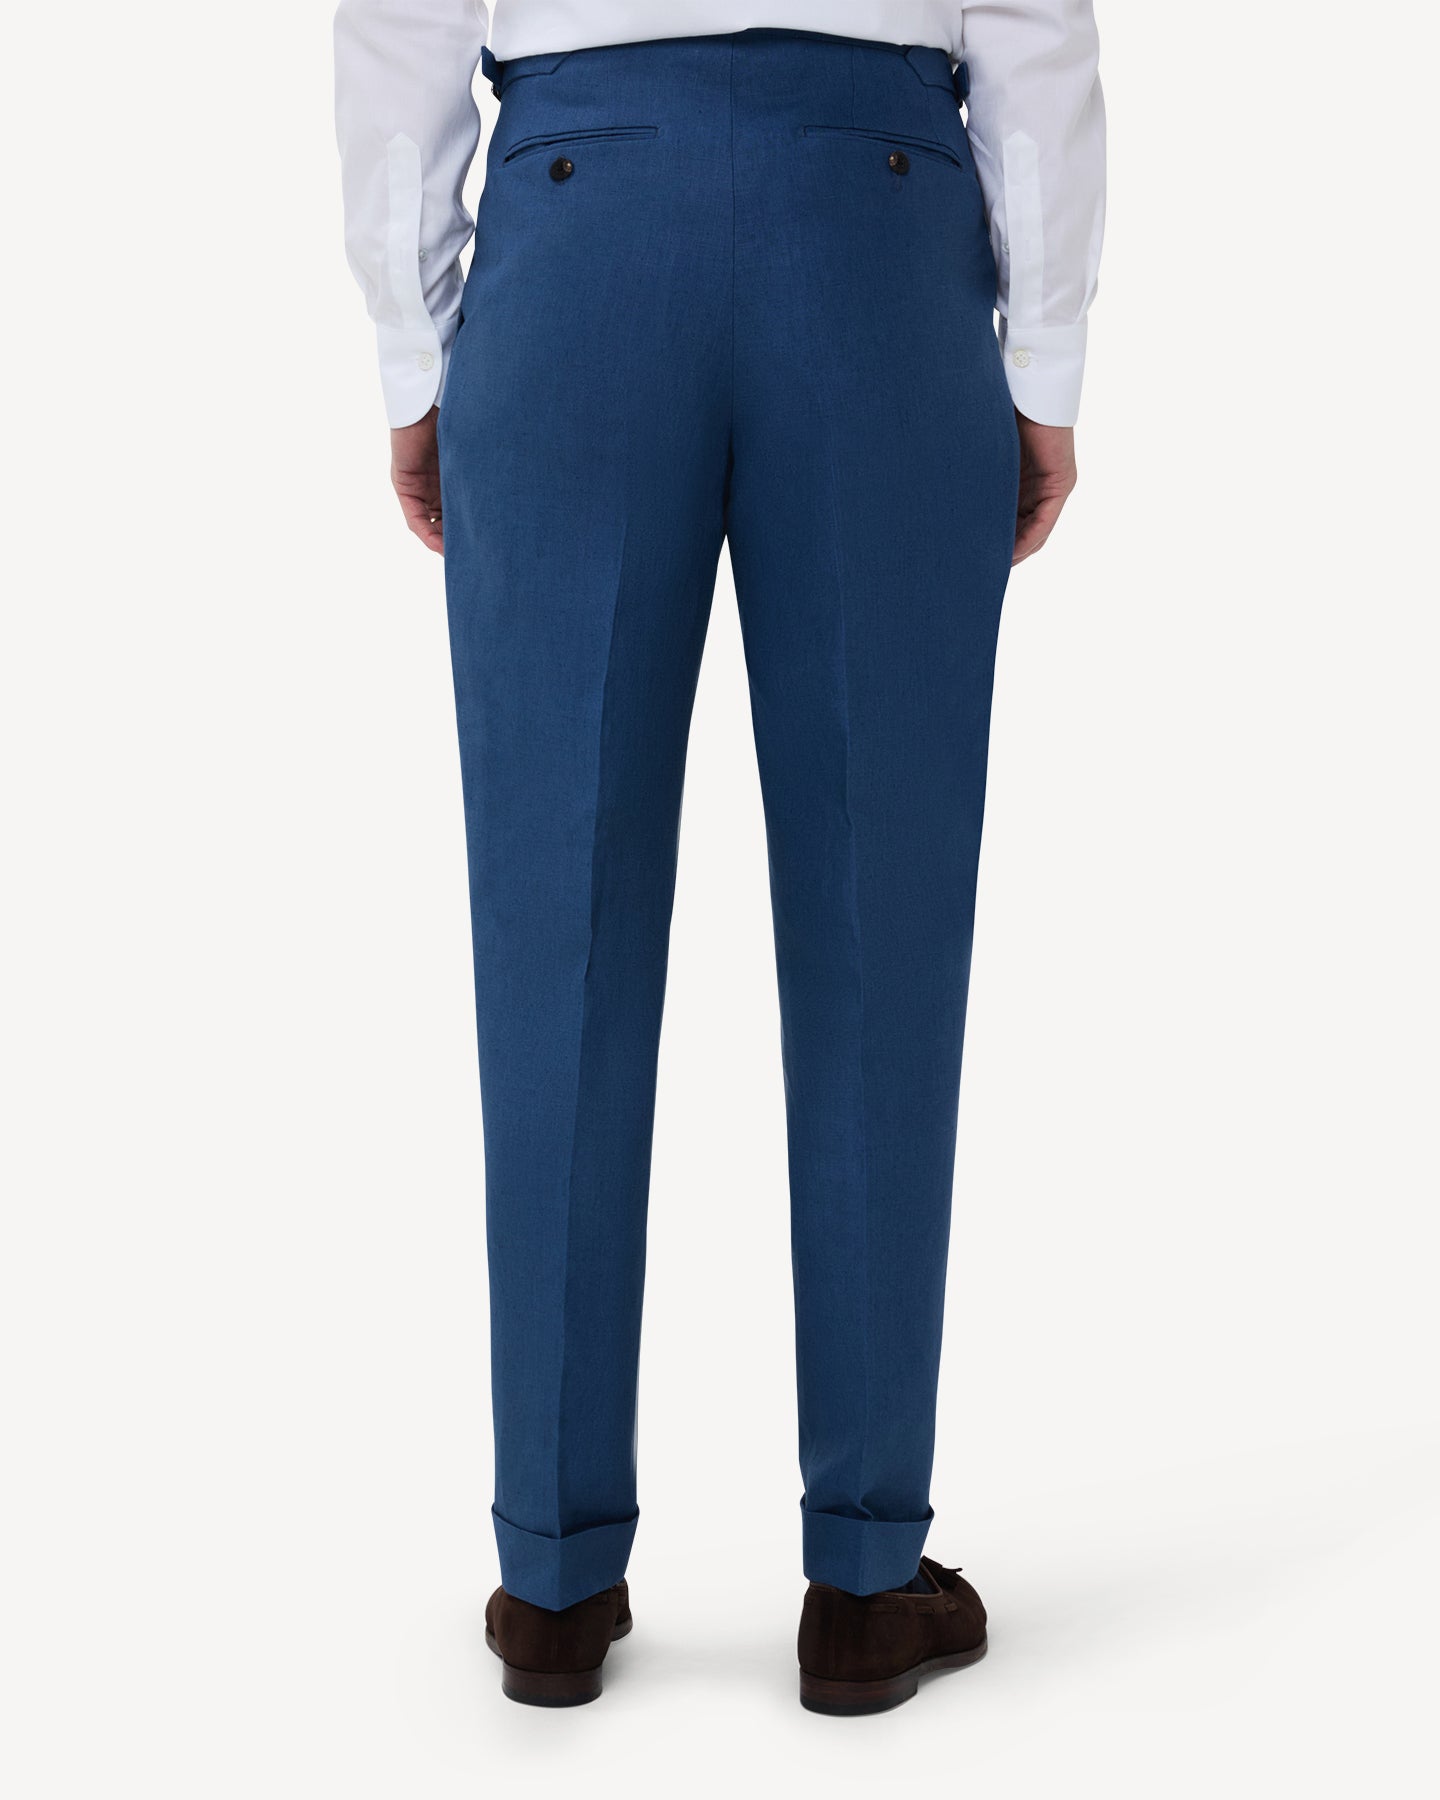 The back of blueberry linen trousers with single pleats and side adjusters